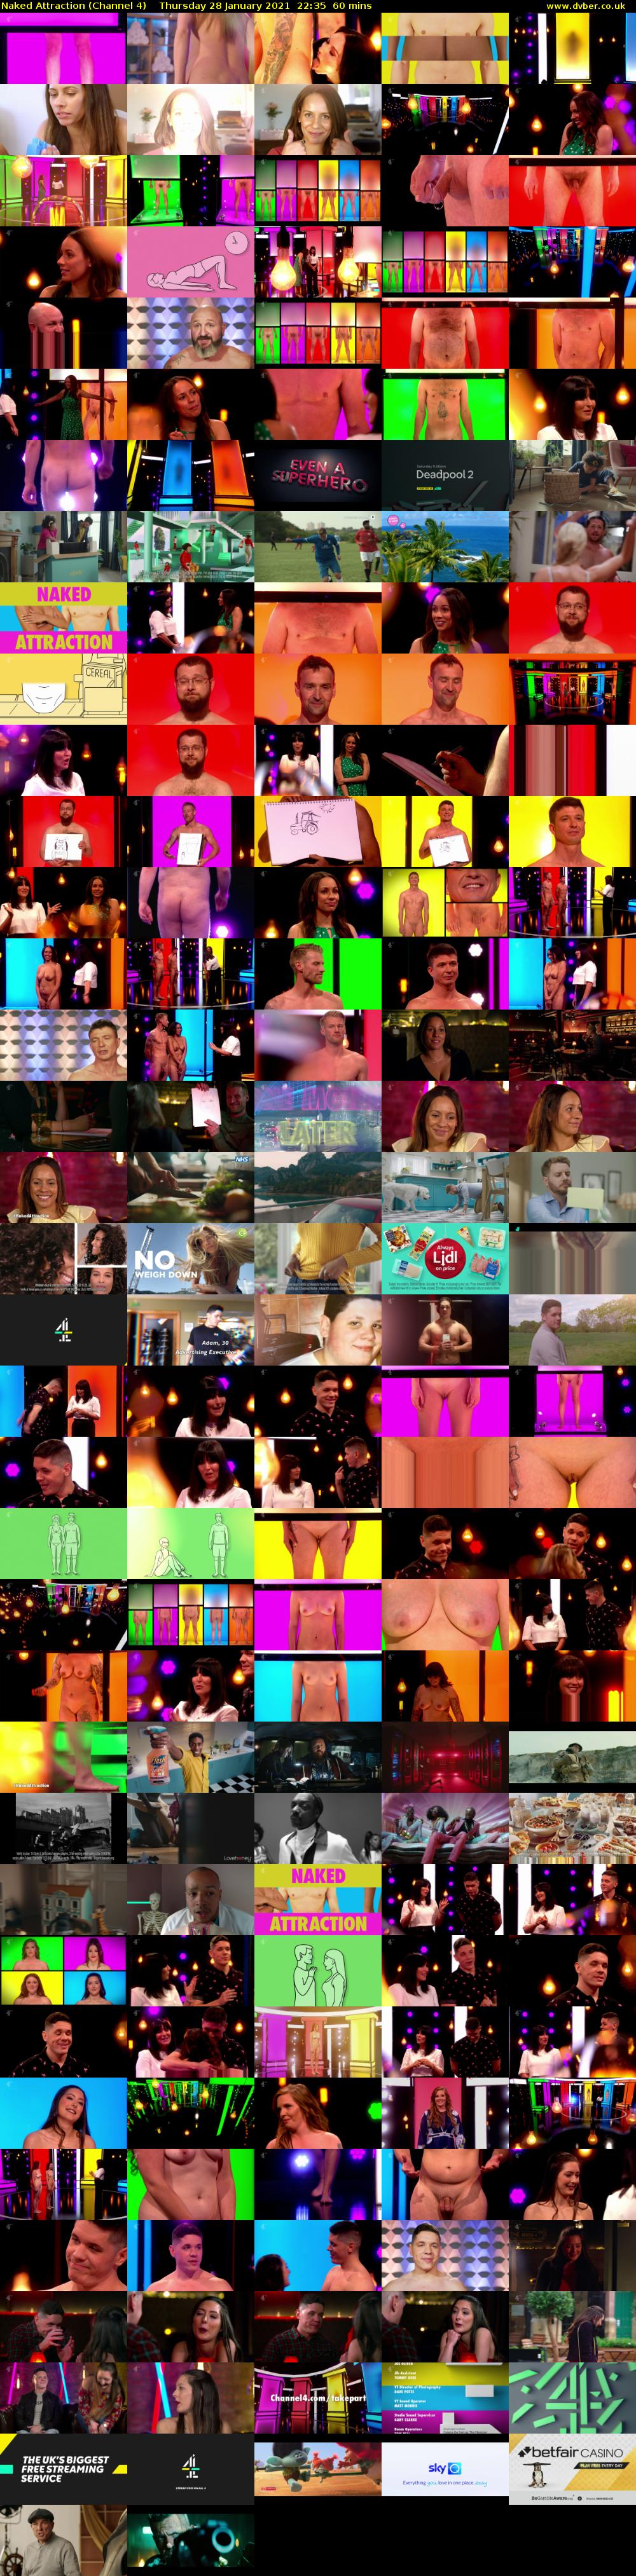 Naked Attraction (Channel 4) Thursday 28 January 2021 22:35 - 23:35